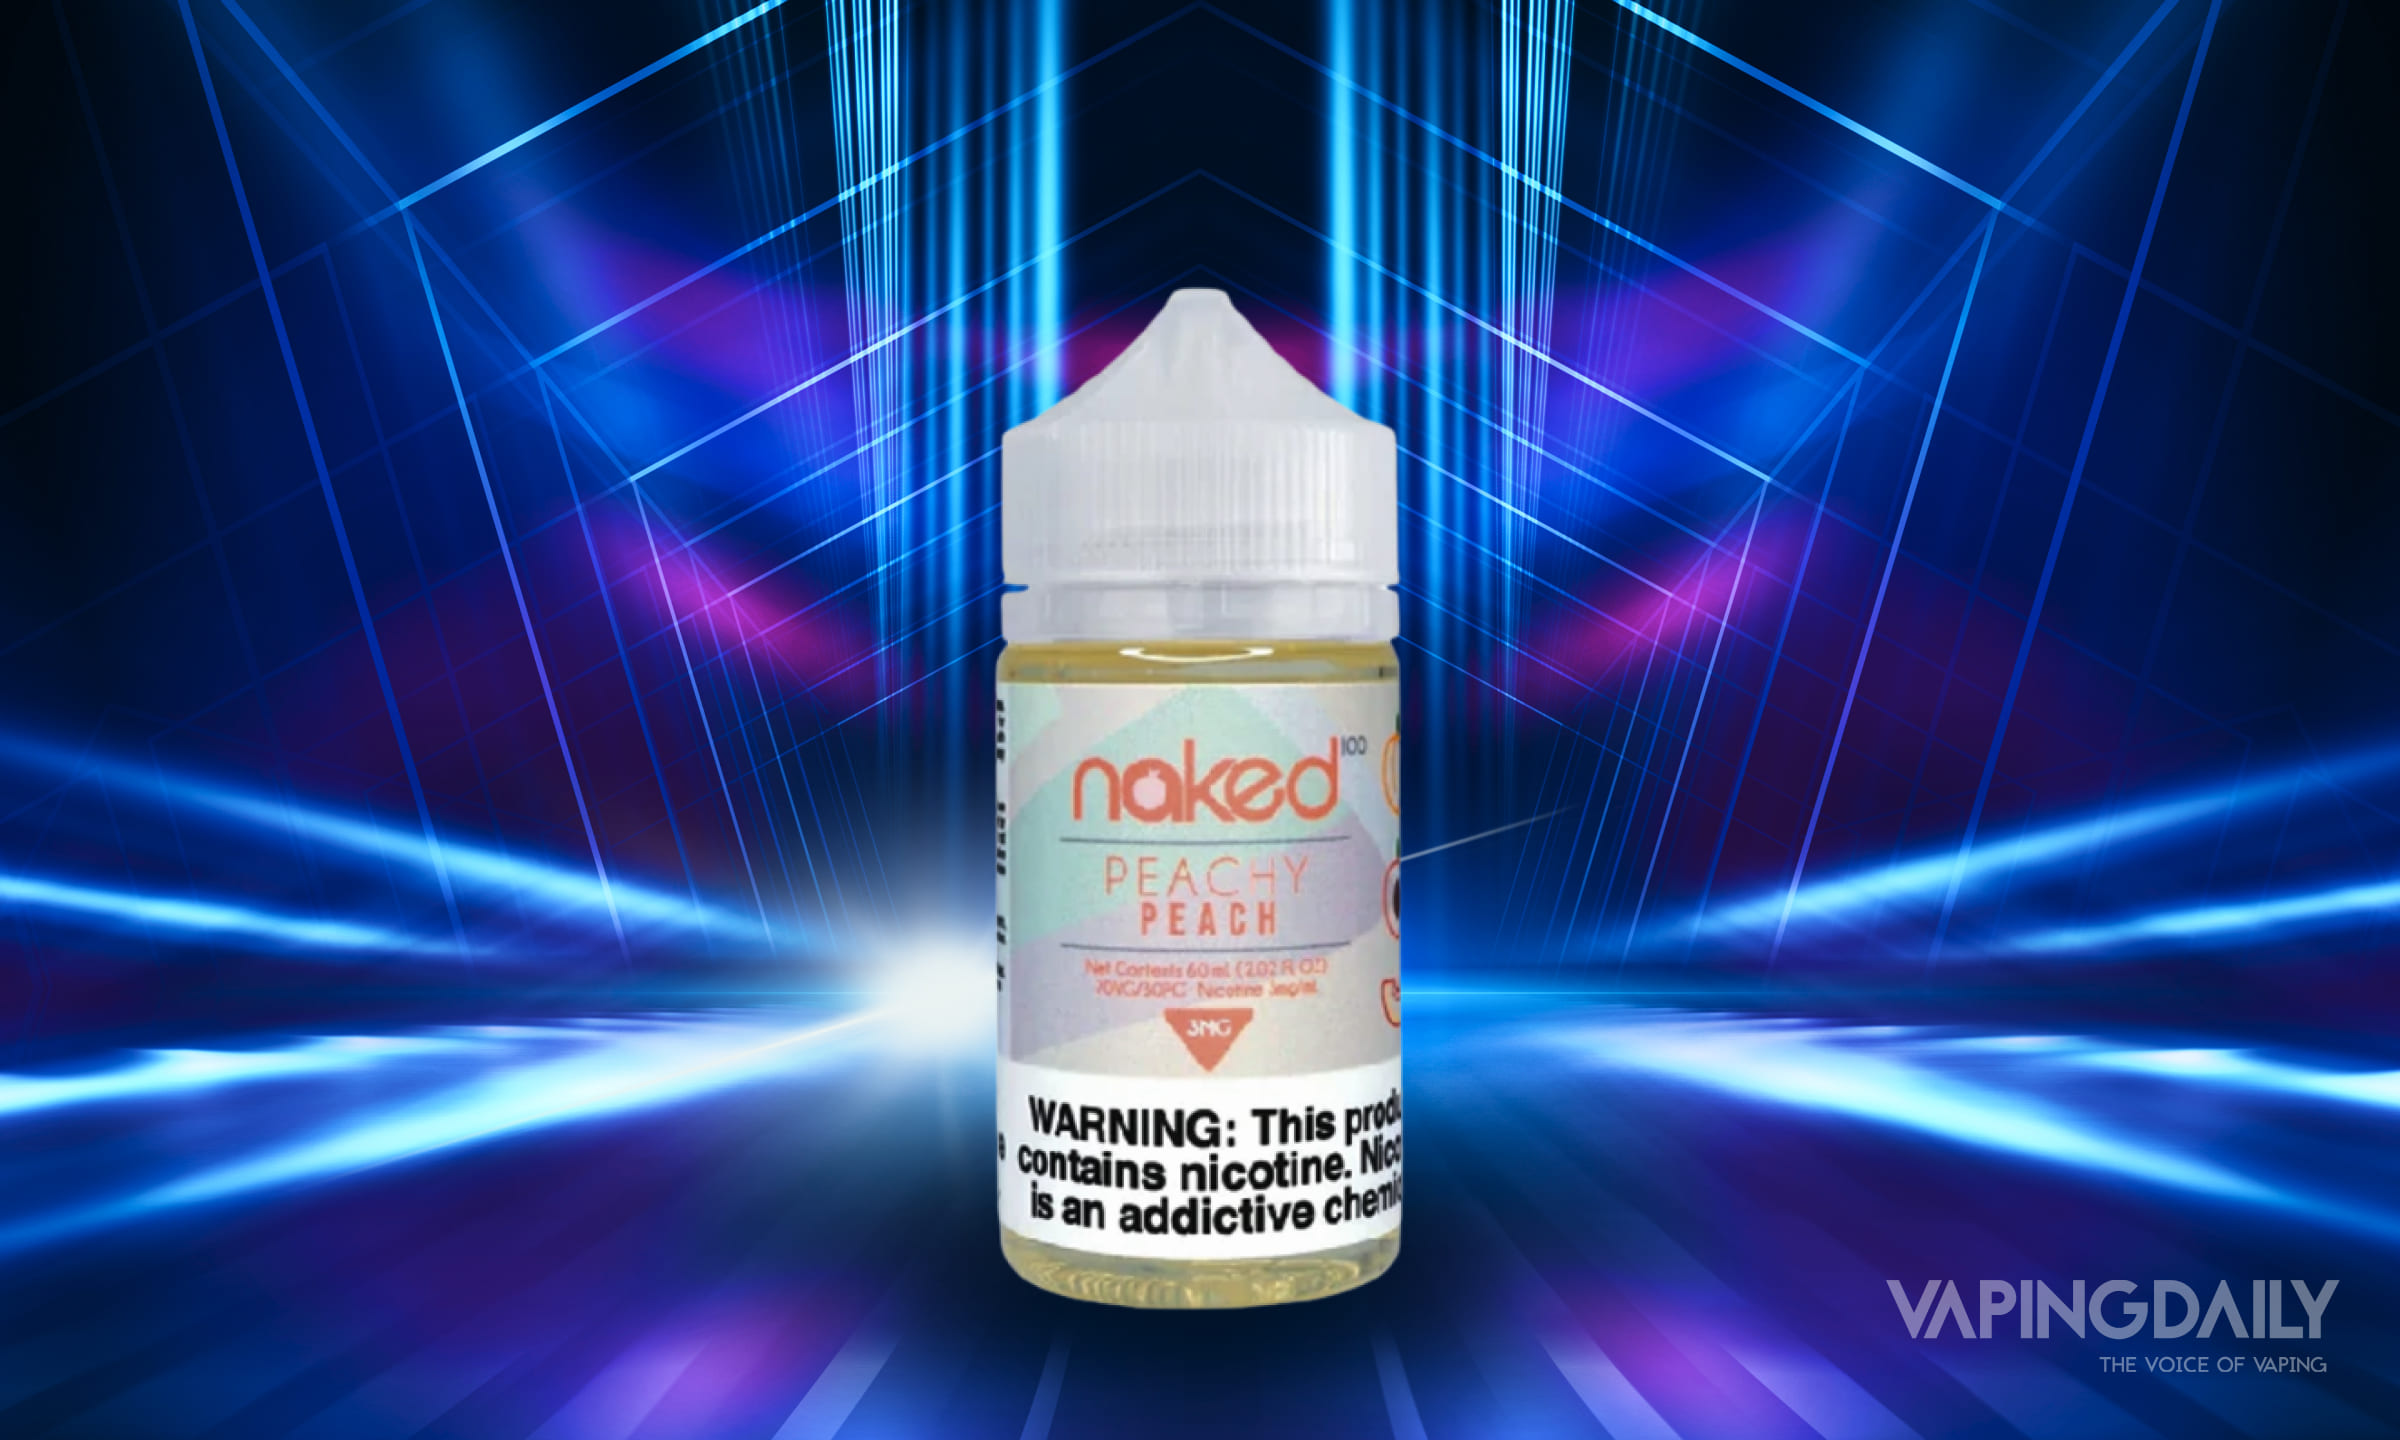 Peach Naked 100 E-Juice Review: An All-Natural, Trifecta of Fruit Flavors